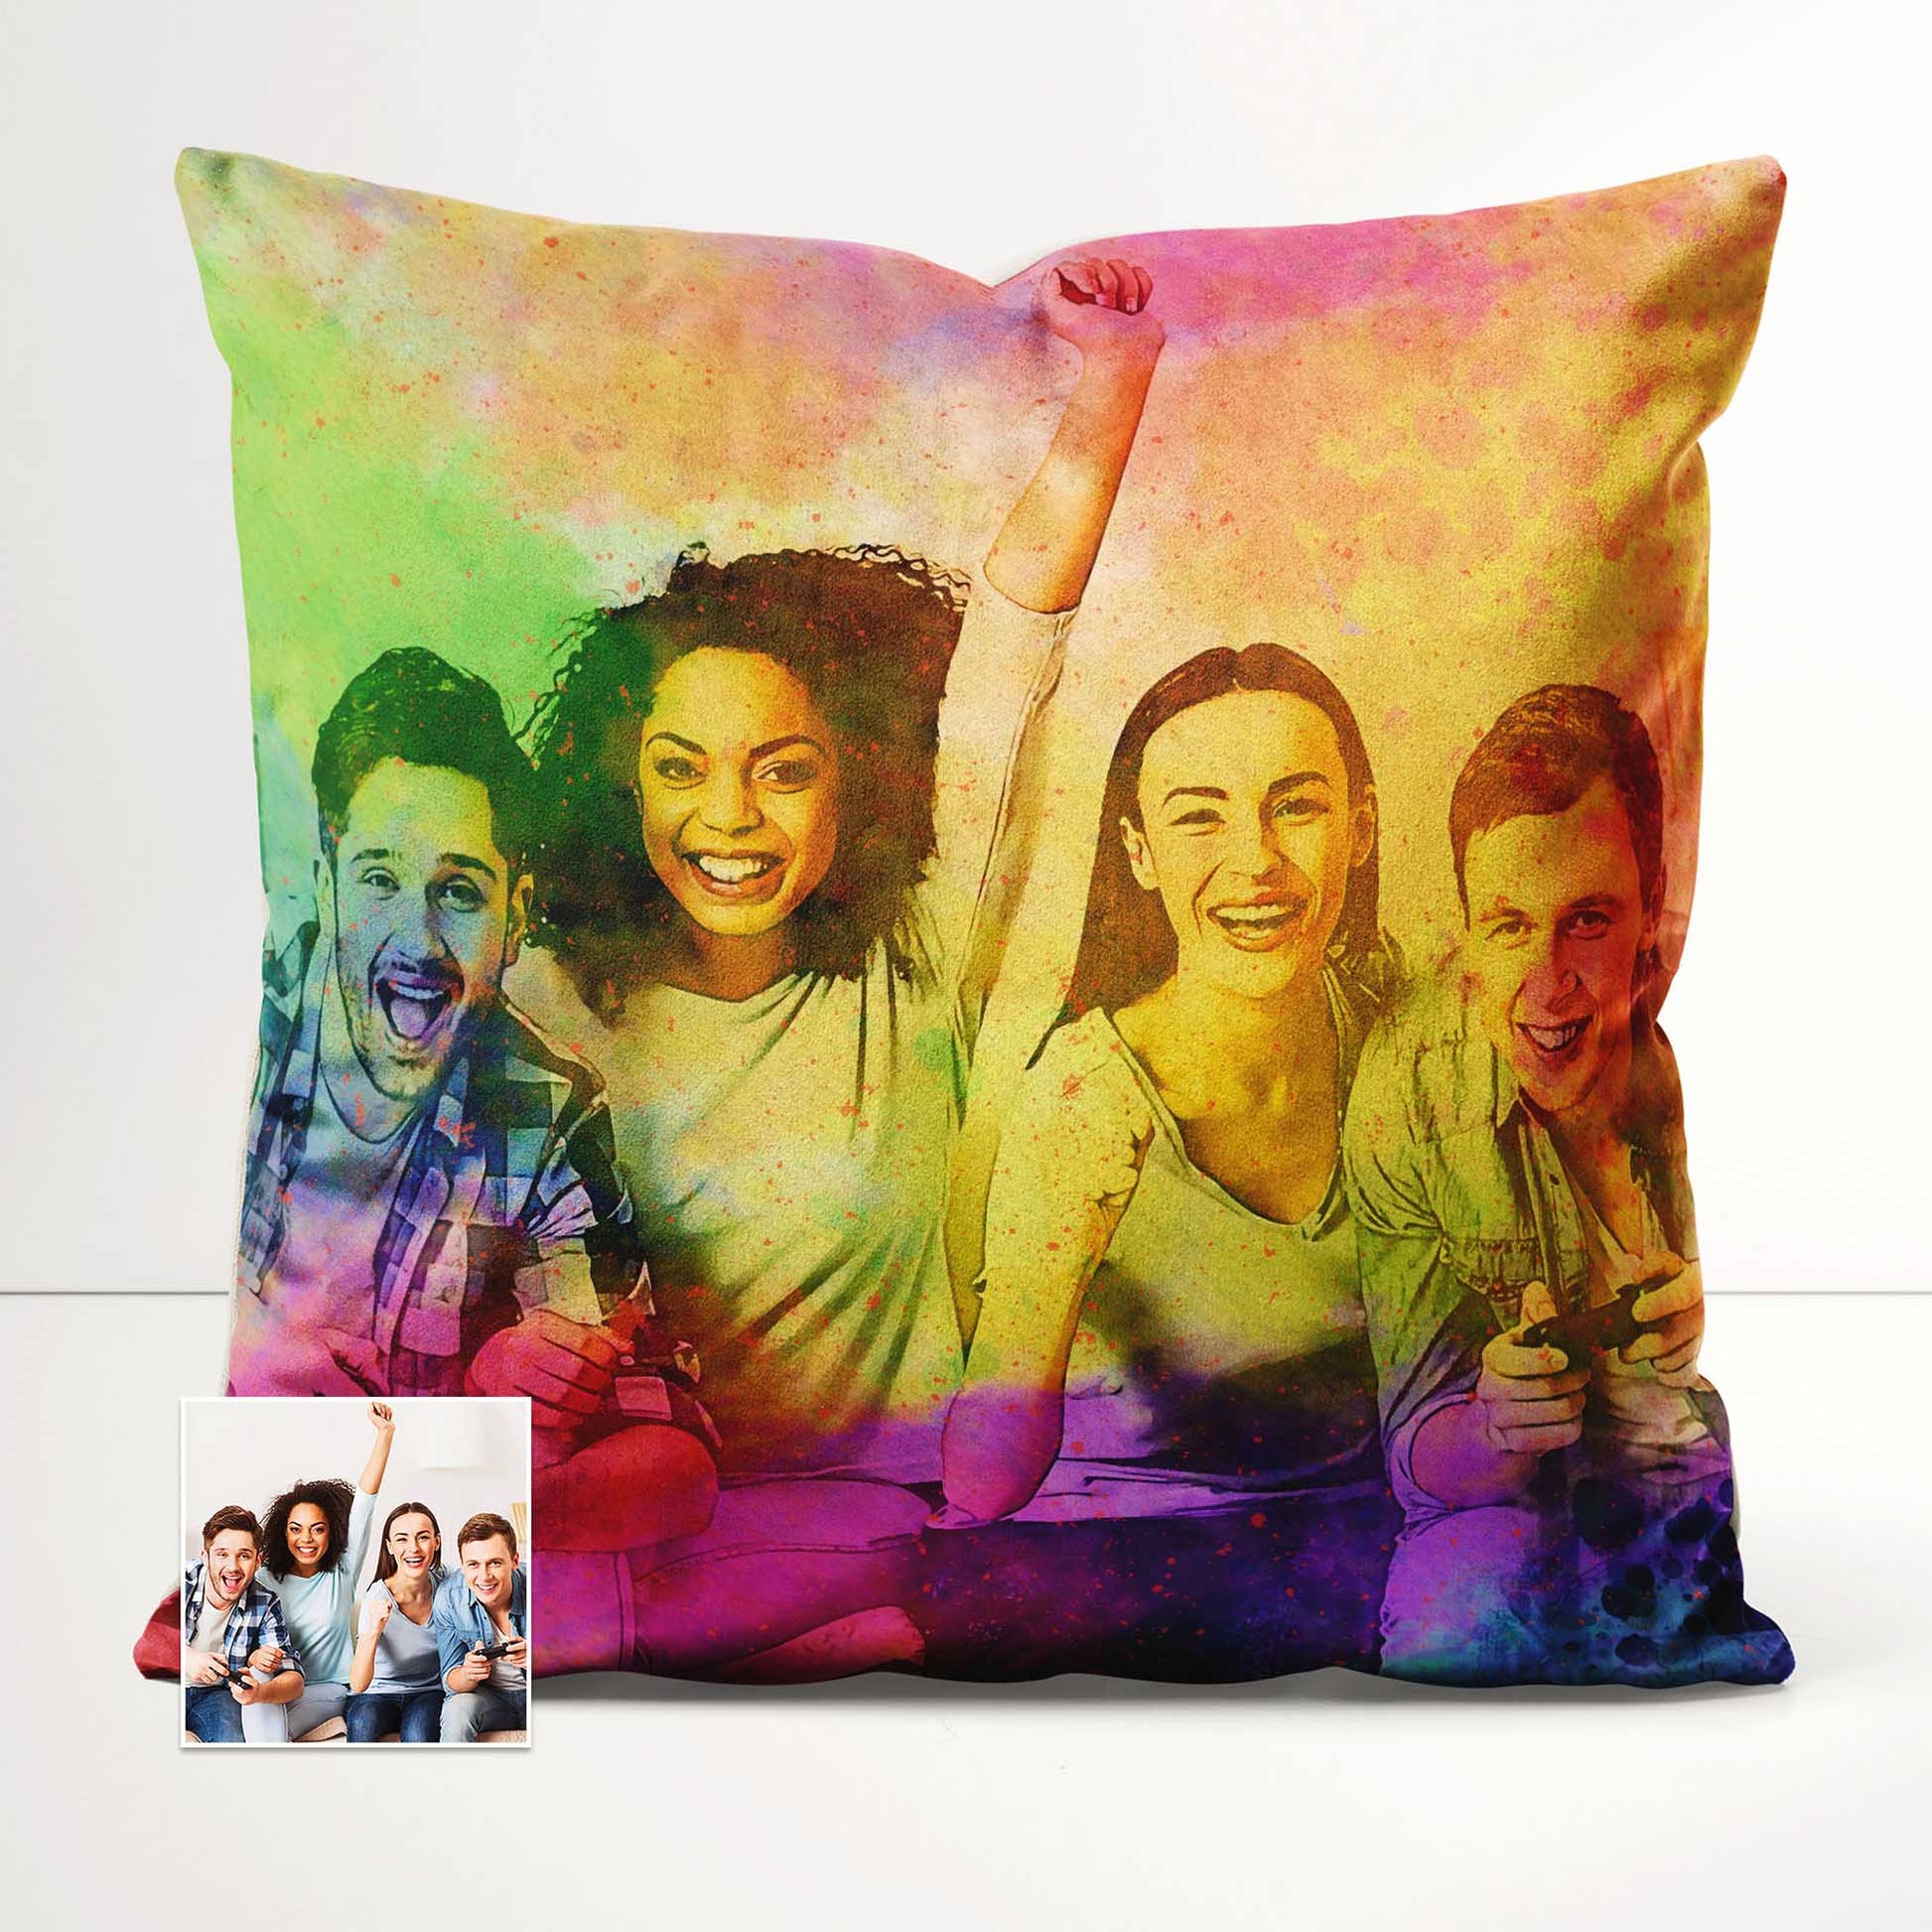 Elevate your decor with the Personalised Splash of Colours Cushion. Its green, yellow, purple, and pink color palette creates an eye-catching display that instantly transforms any space. Handmade with love and attention to detail